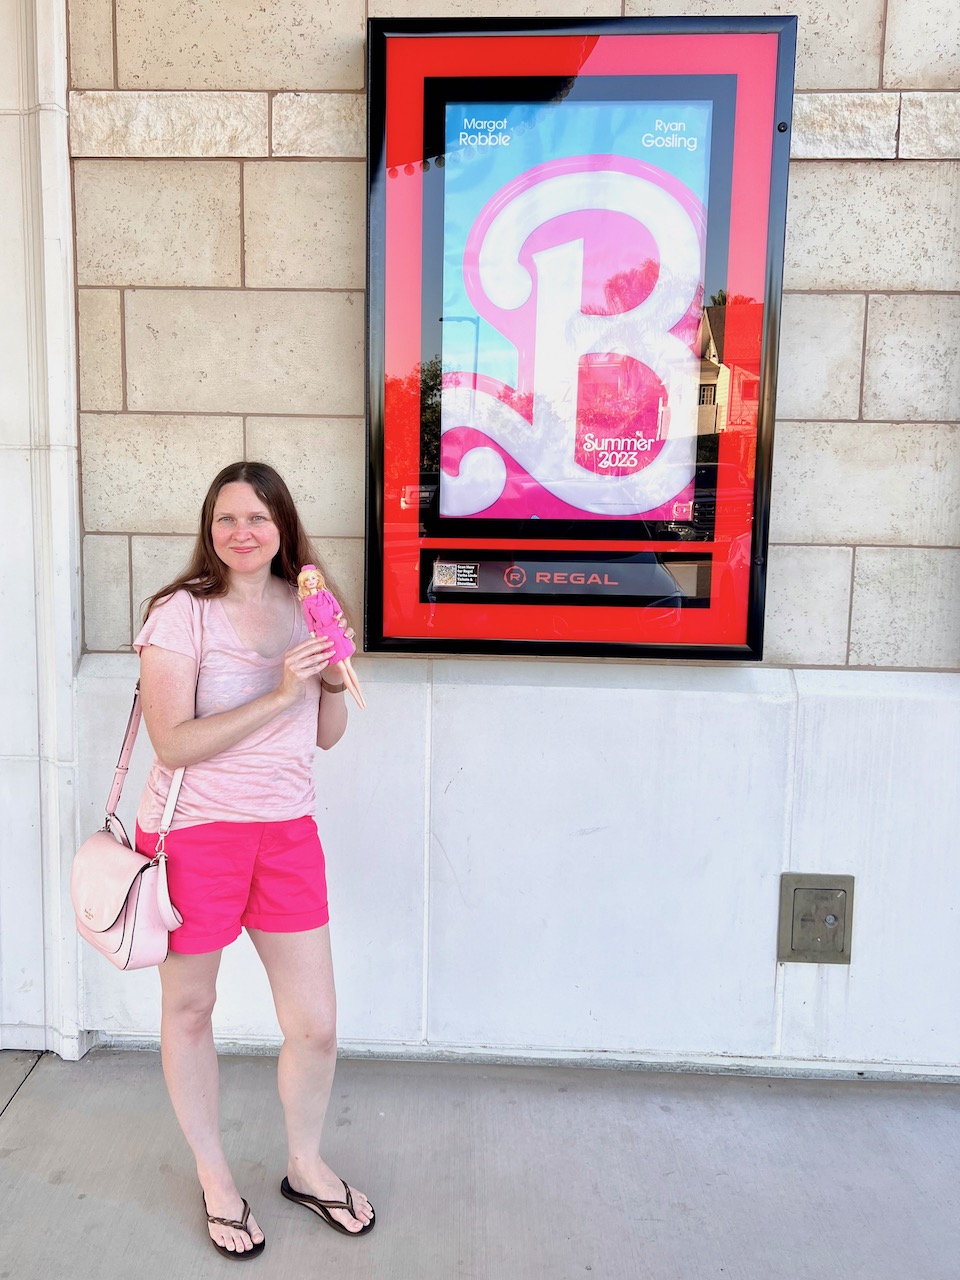 Shannon standing in front of the poster for the Barbie movie. Shannon is wearing a light pink shirt with dark pink shorts. Shannon is holding Barbie doll as Elle Woods from Legally Blonde 2.